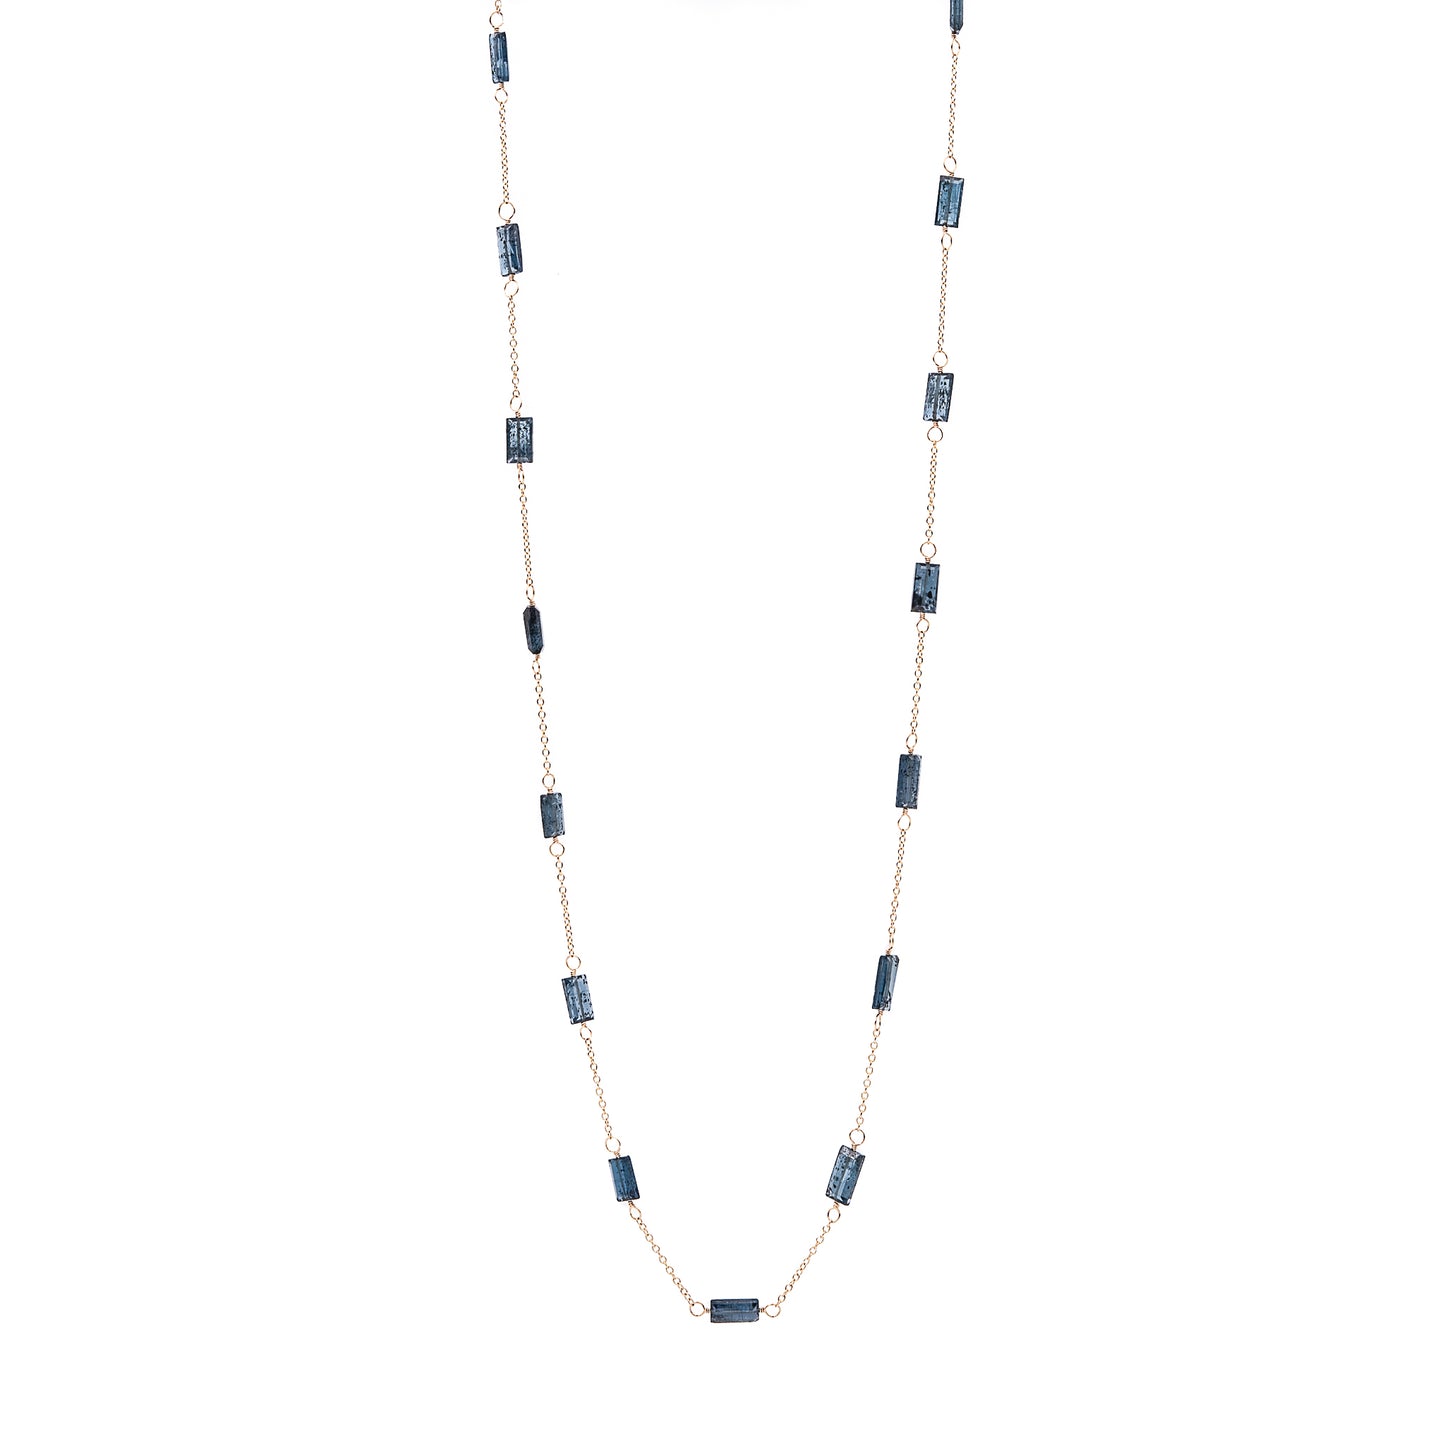 Zurina Ketola long moss aquamarine necklace in 14K gold fill shown long on white background.